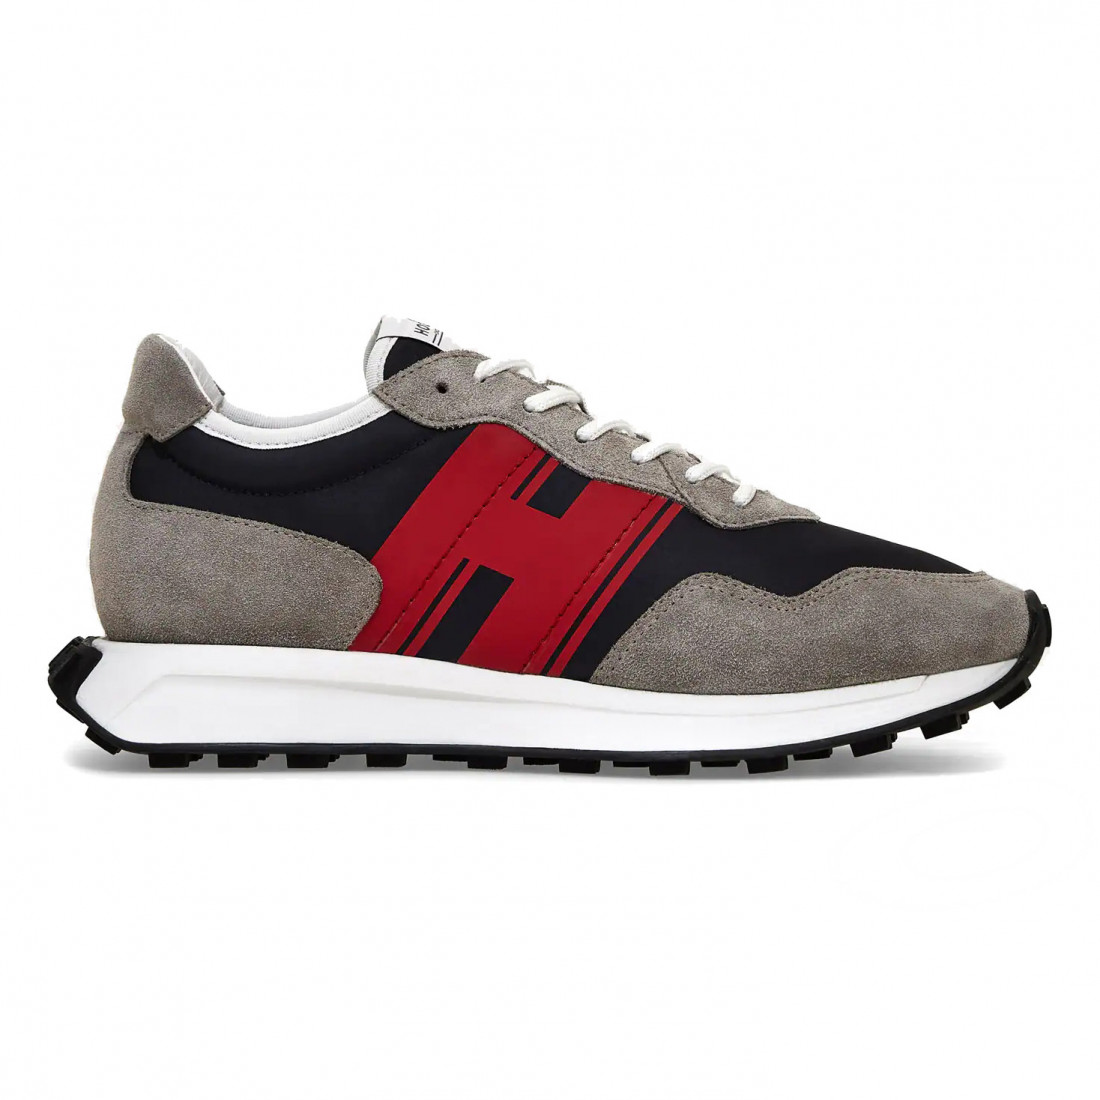 Hogan H601 Gray, Blue and Red men's sneaker